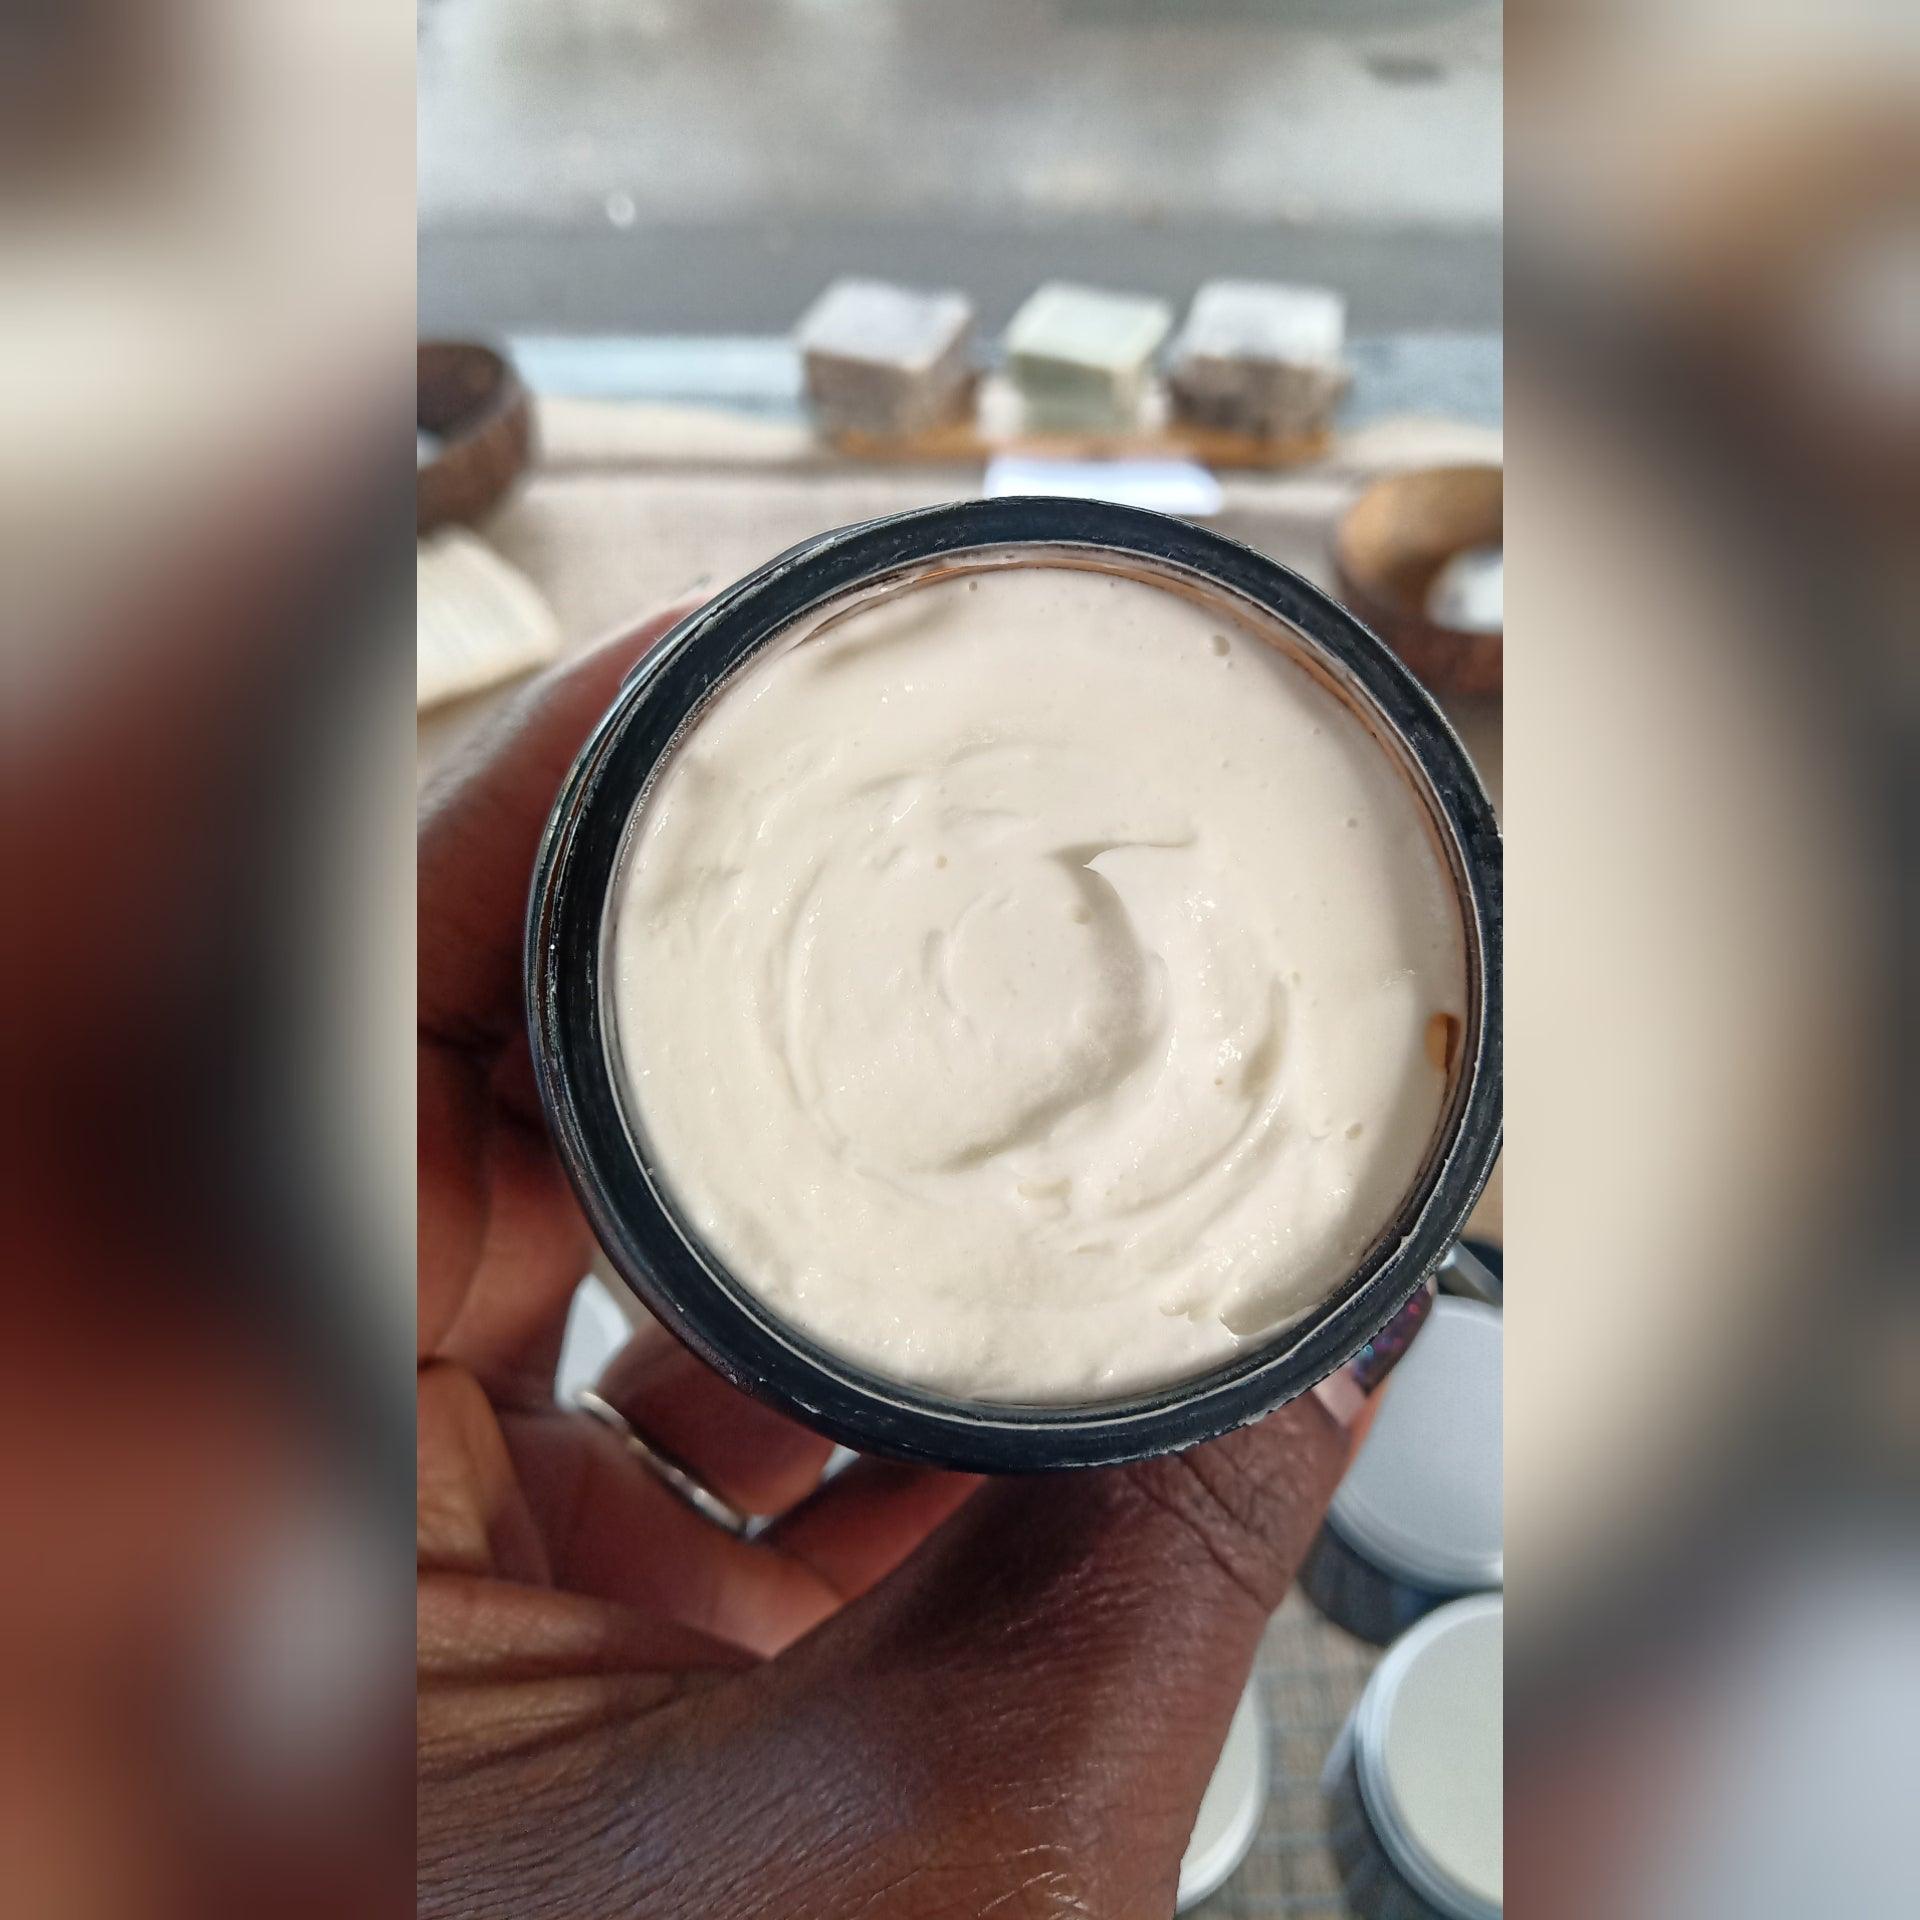 Skin Whipped Body Butter - Natural Spa Beauty